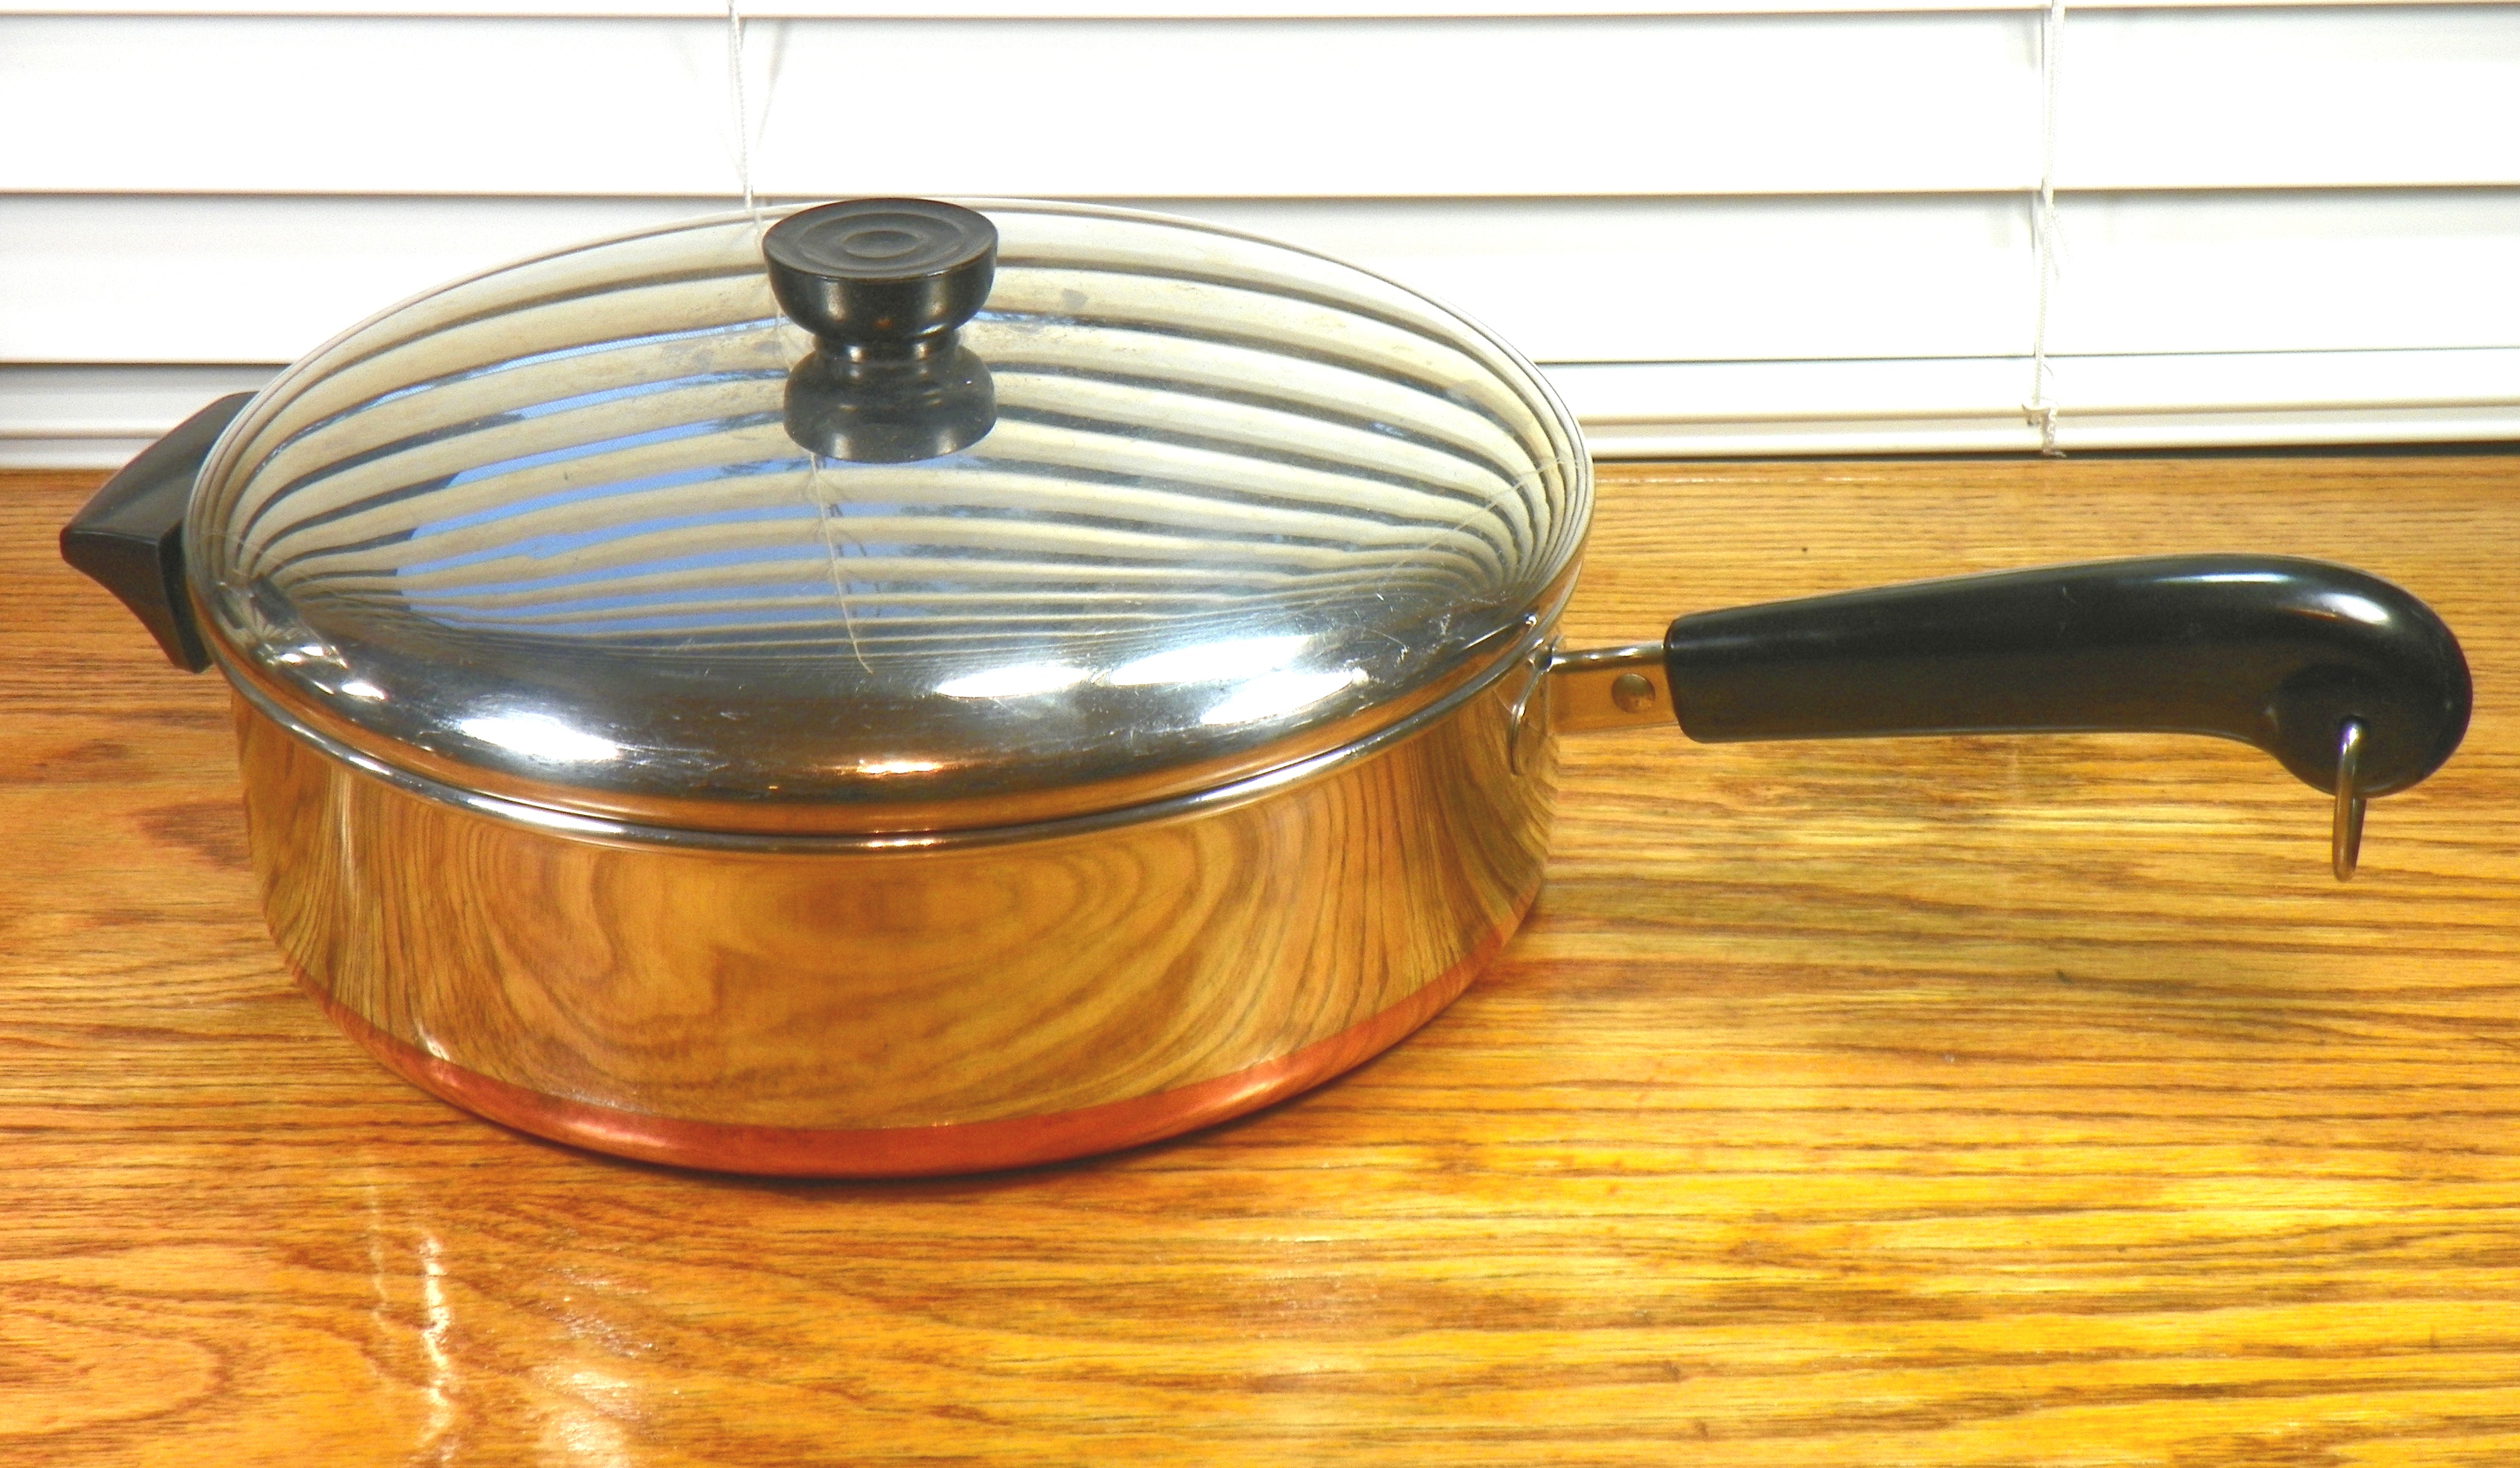 Revere Ware 1801 Copper Bottom 12 Inch Skillet Fry Pan with Lid